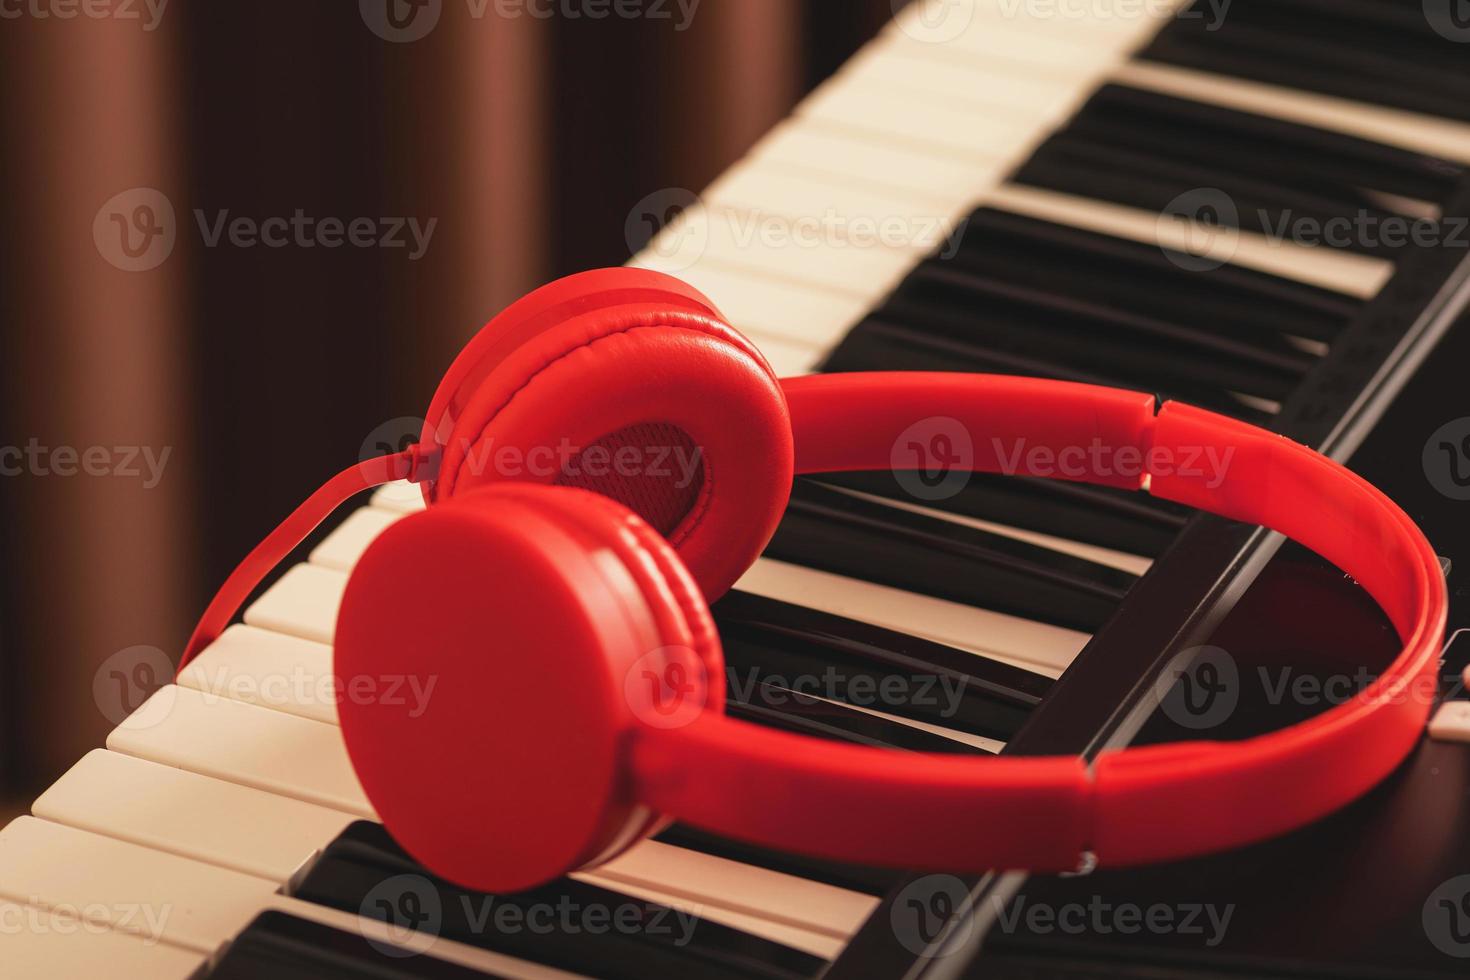 Closeup of red headphones over synthesizer keyboard photo